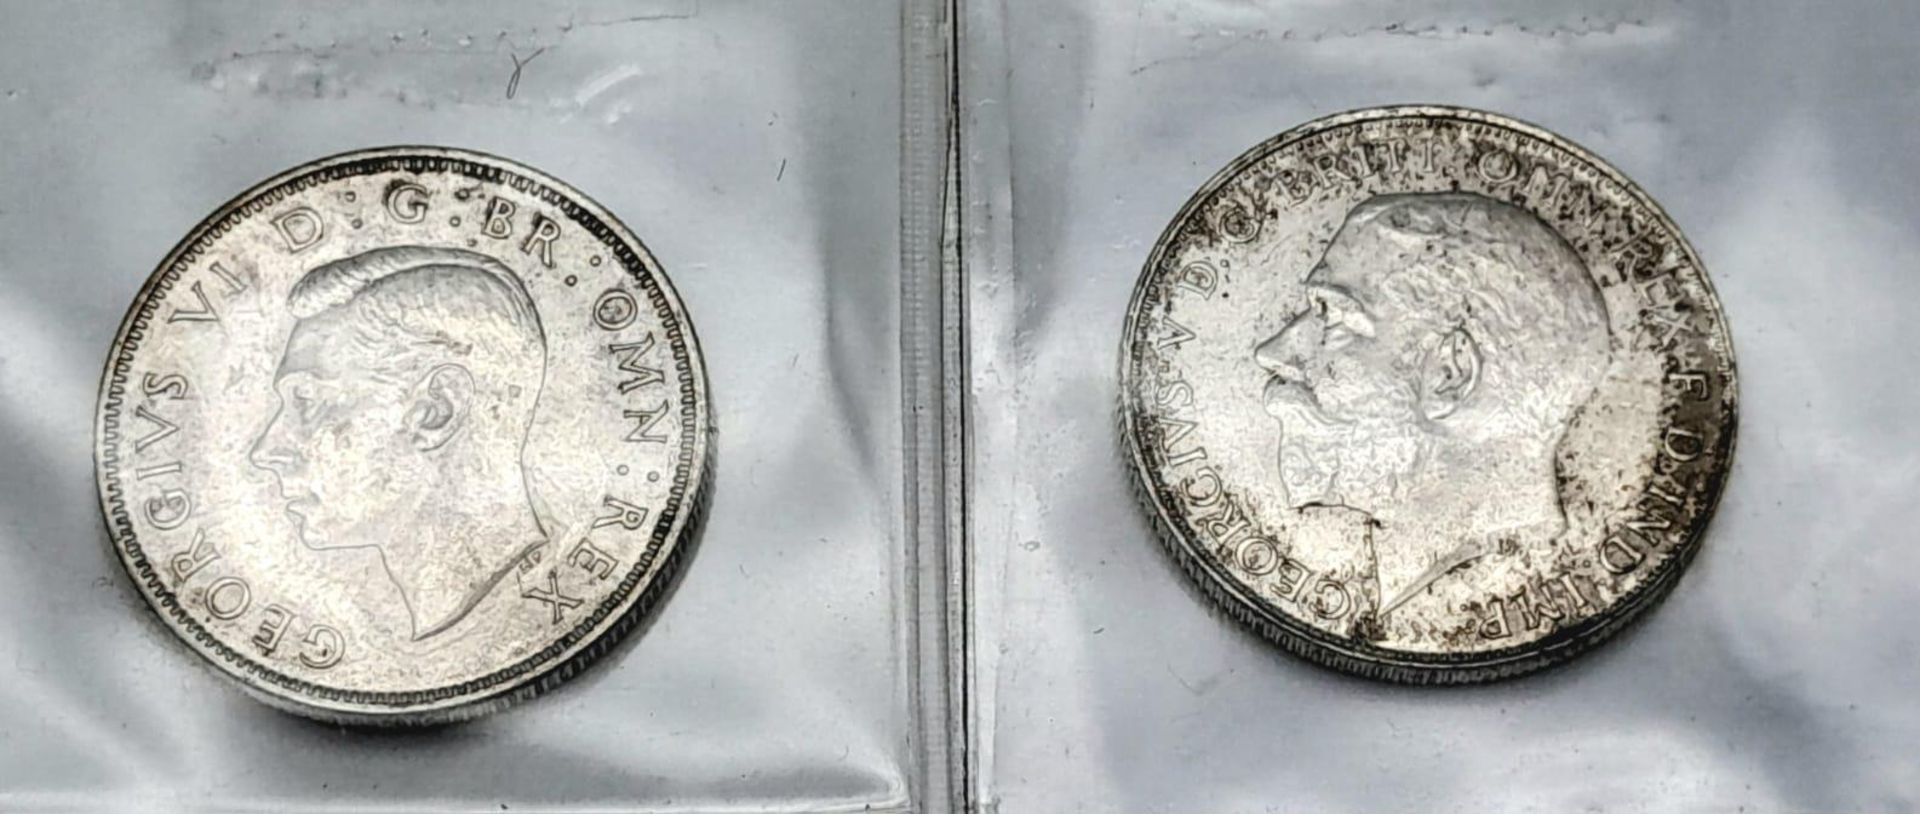 Two ‘About Uncirculated’ Condition (Sheldon Scale) Silver Florins Dated 1923 & 1937.